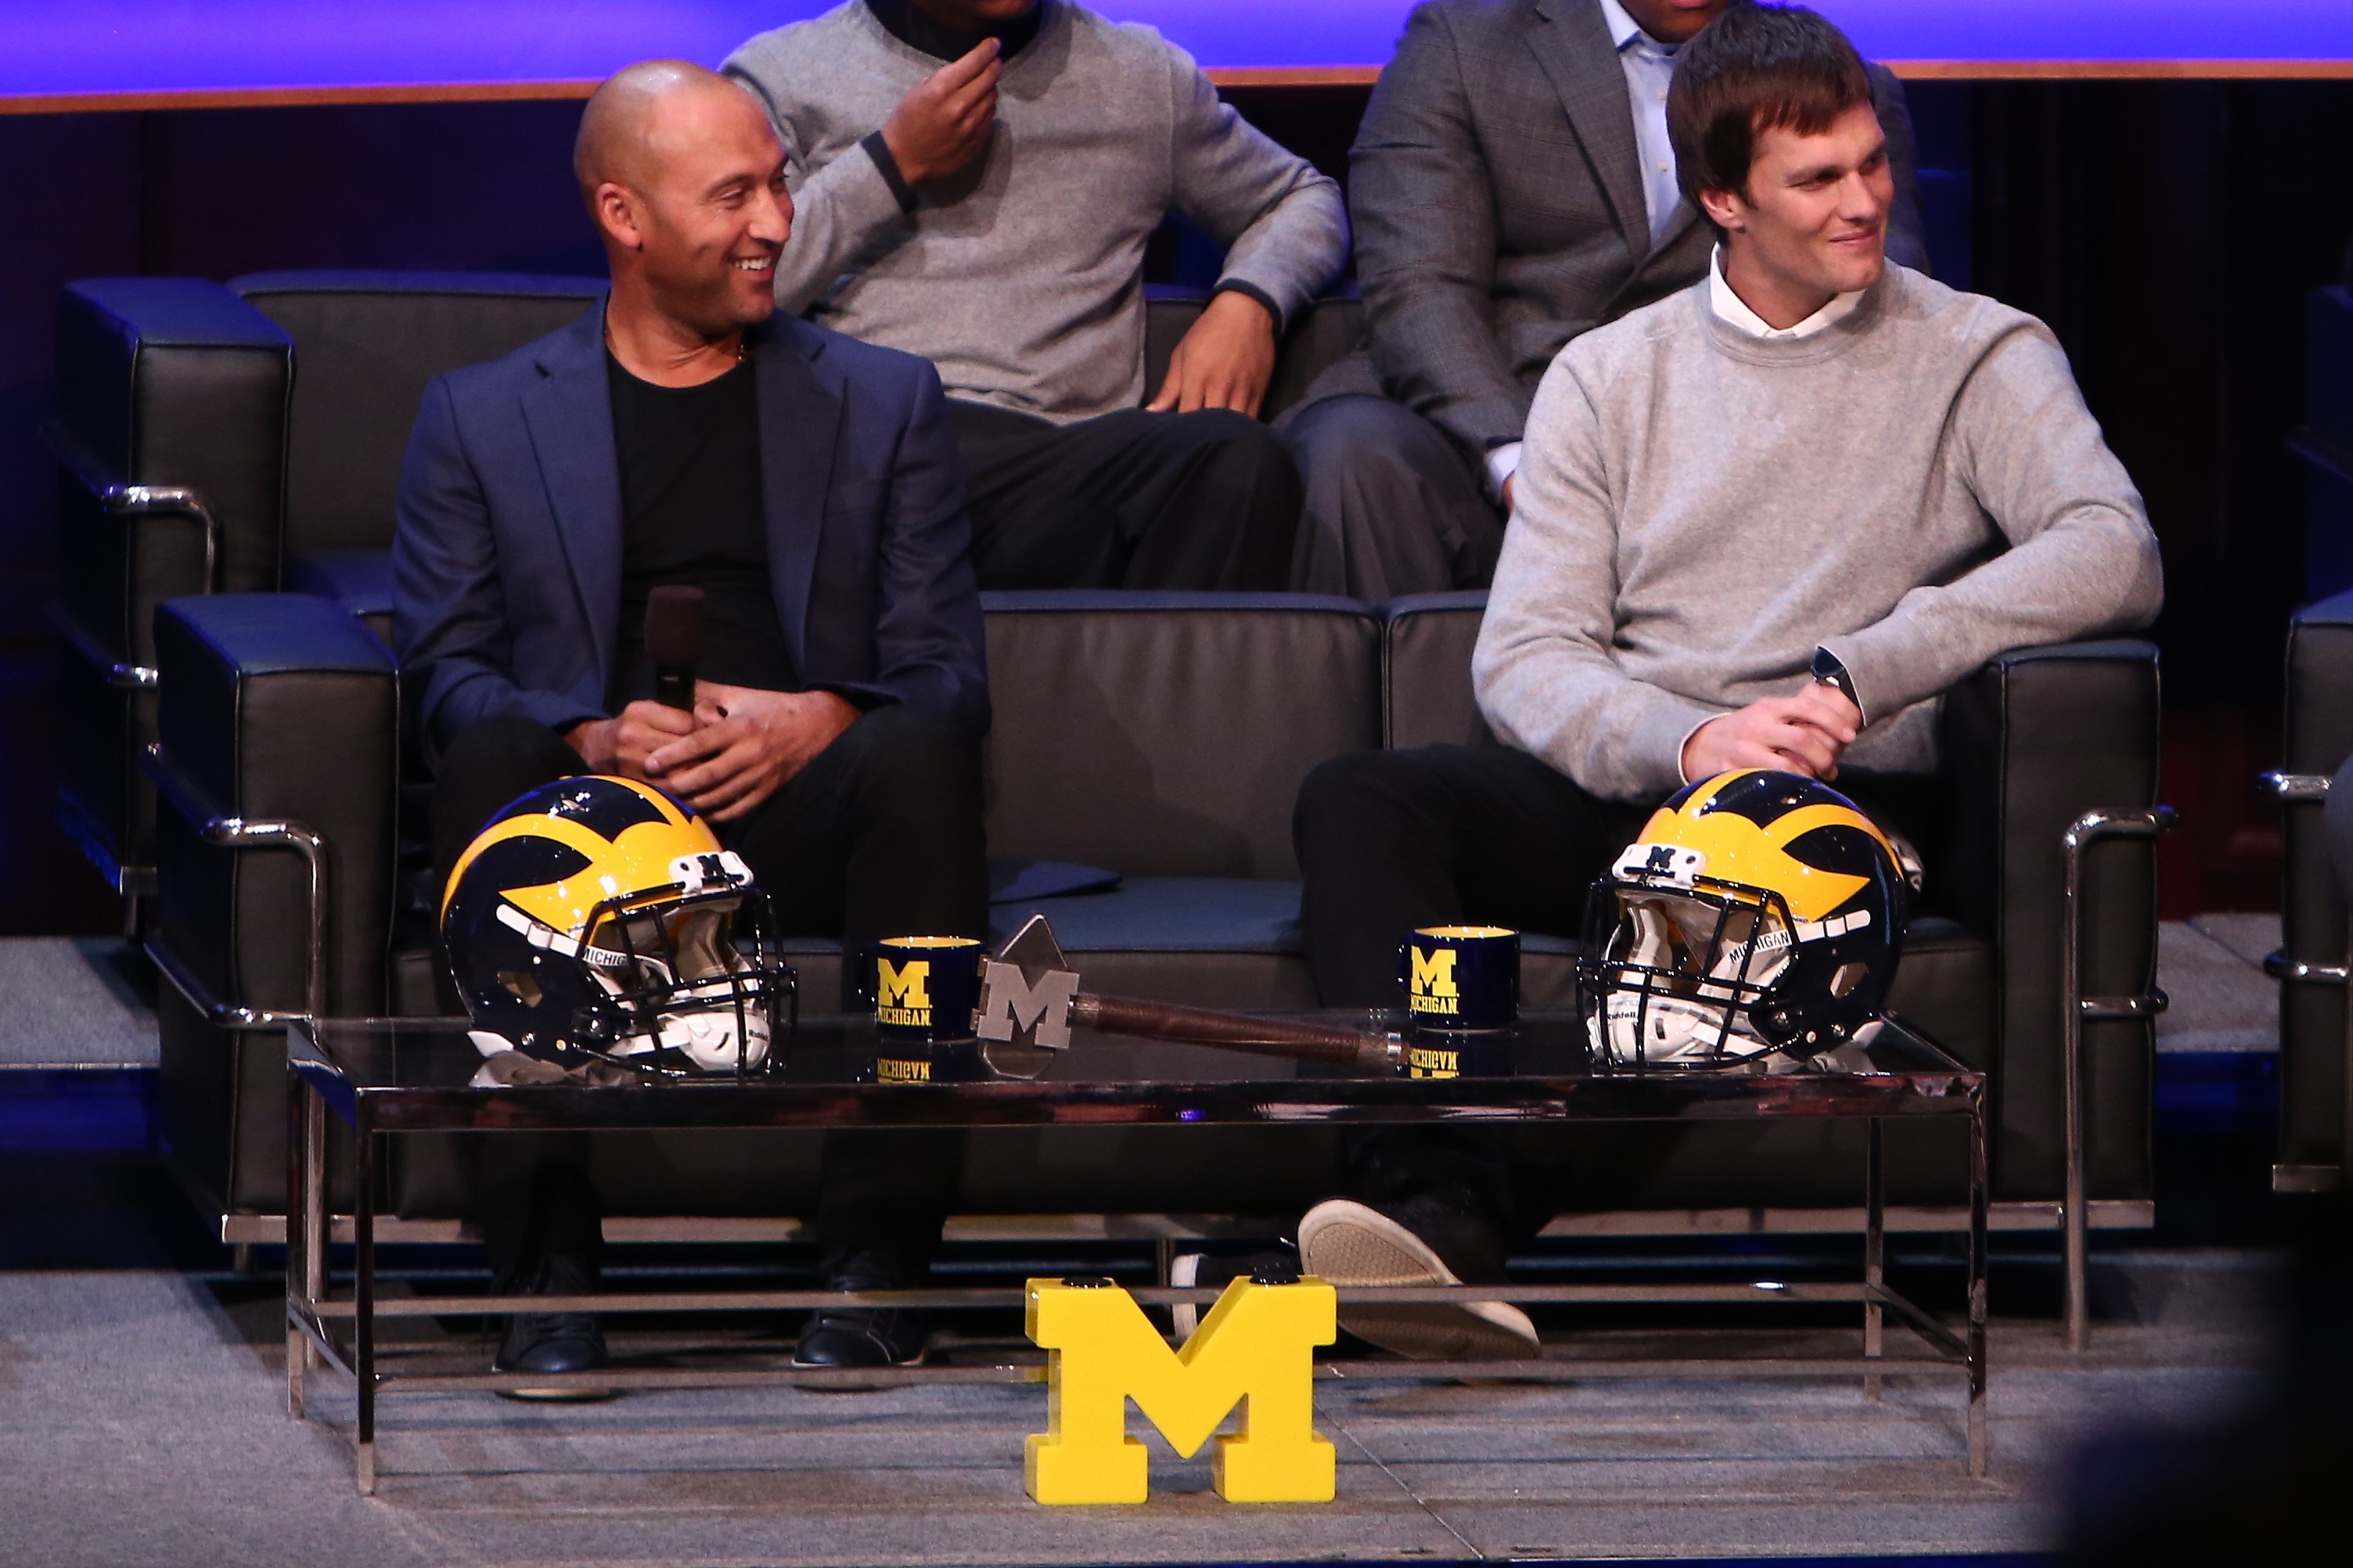 Derek Jeter and Tom Brady on stage together at the Michigan Signing of the Stars event